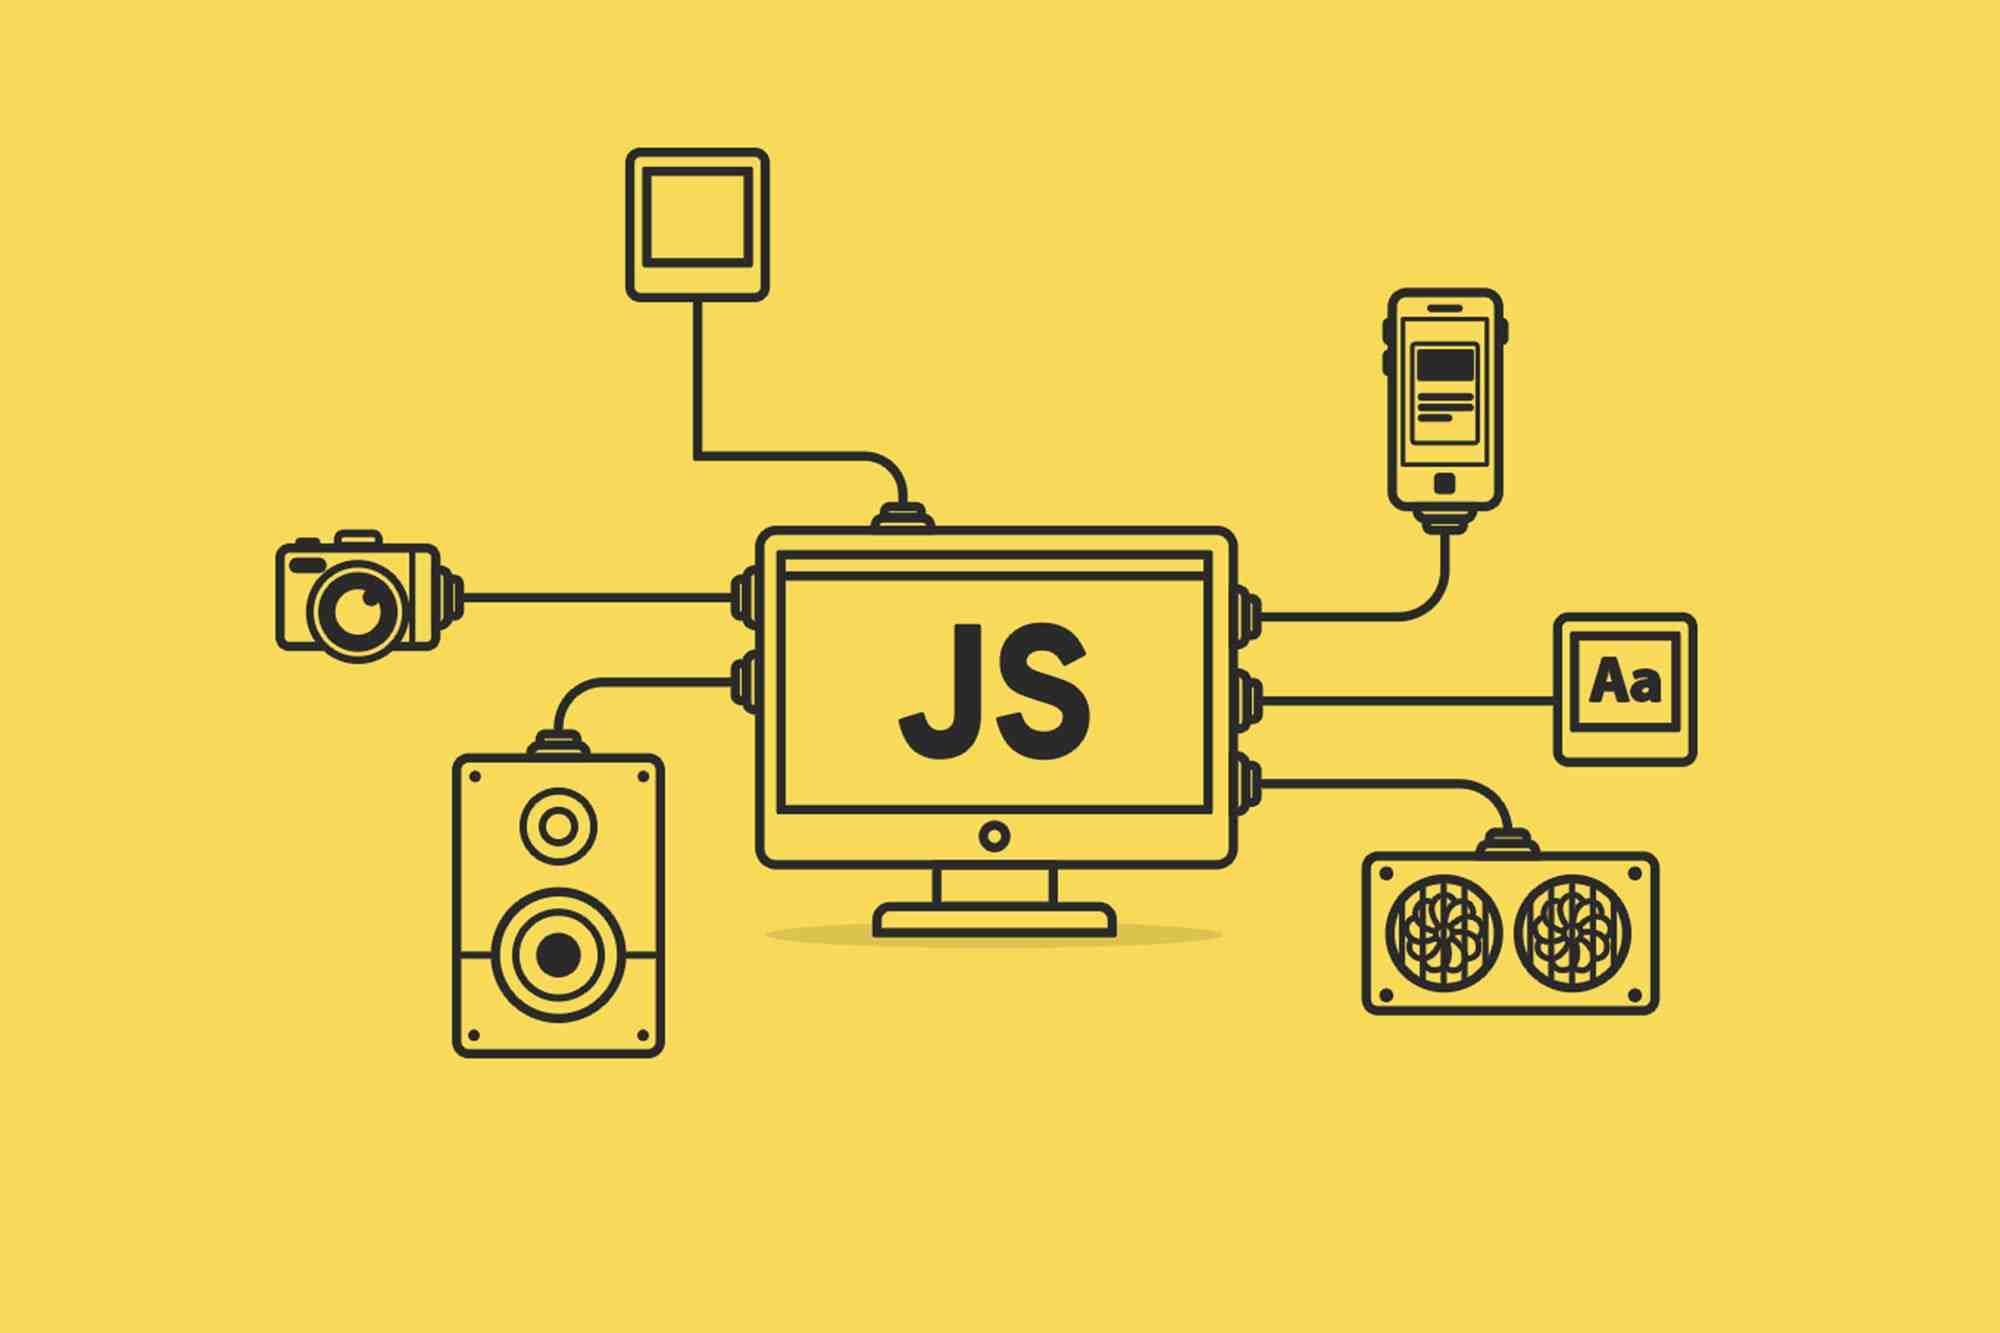 What Is The Difference Between Java And Javascript?